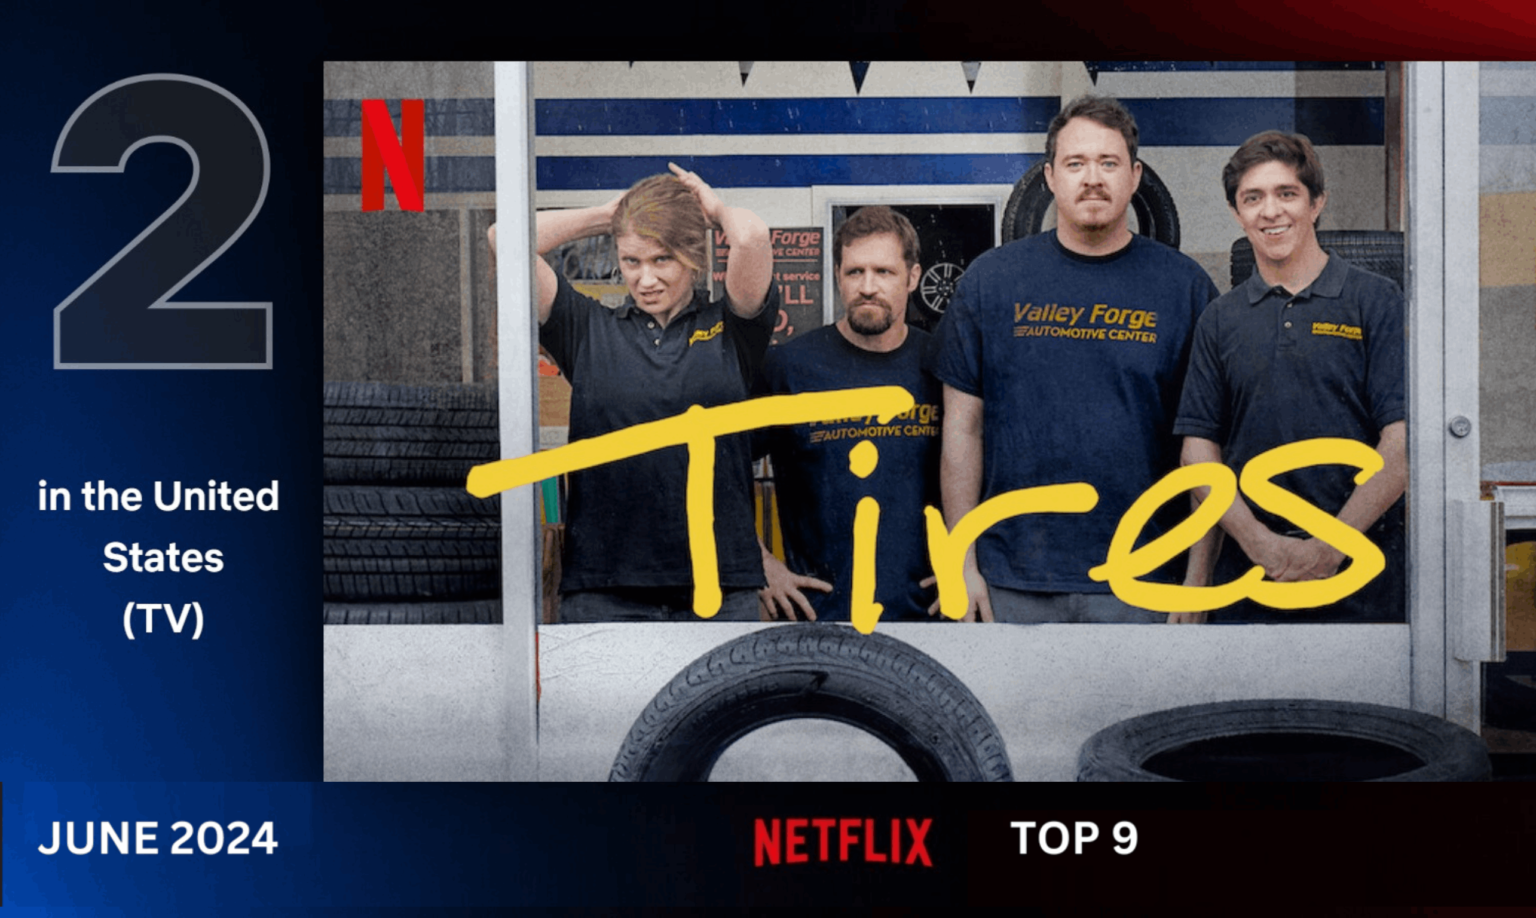 Top-9-Most-Popular-TV-Shows-on-Netflix-in-United-State-Thumbnail-Image-Cherry-streamers-2